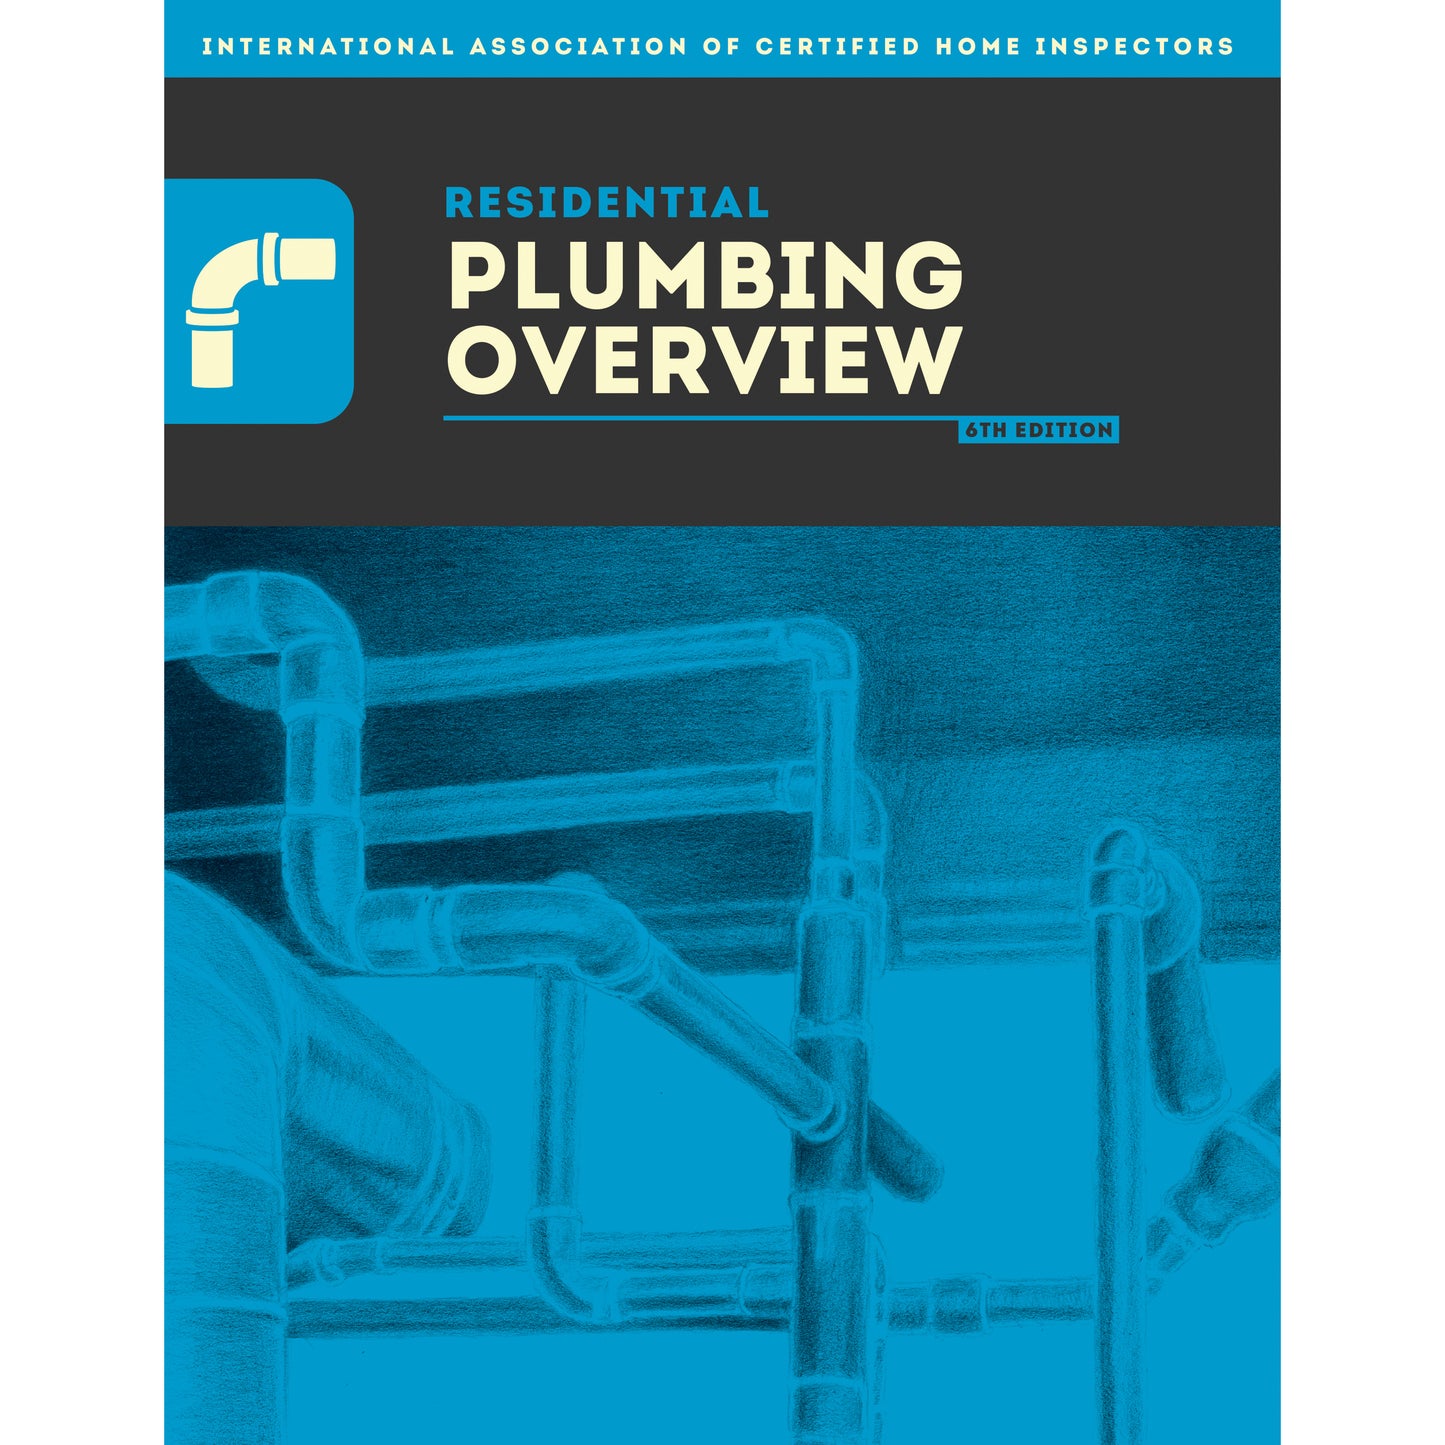 Residential Plumbing Overview PDF Download